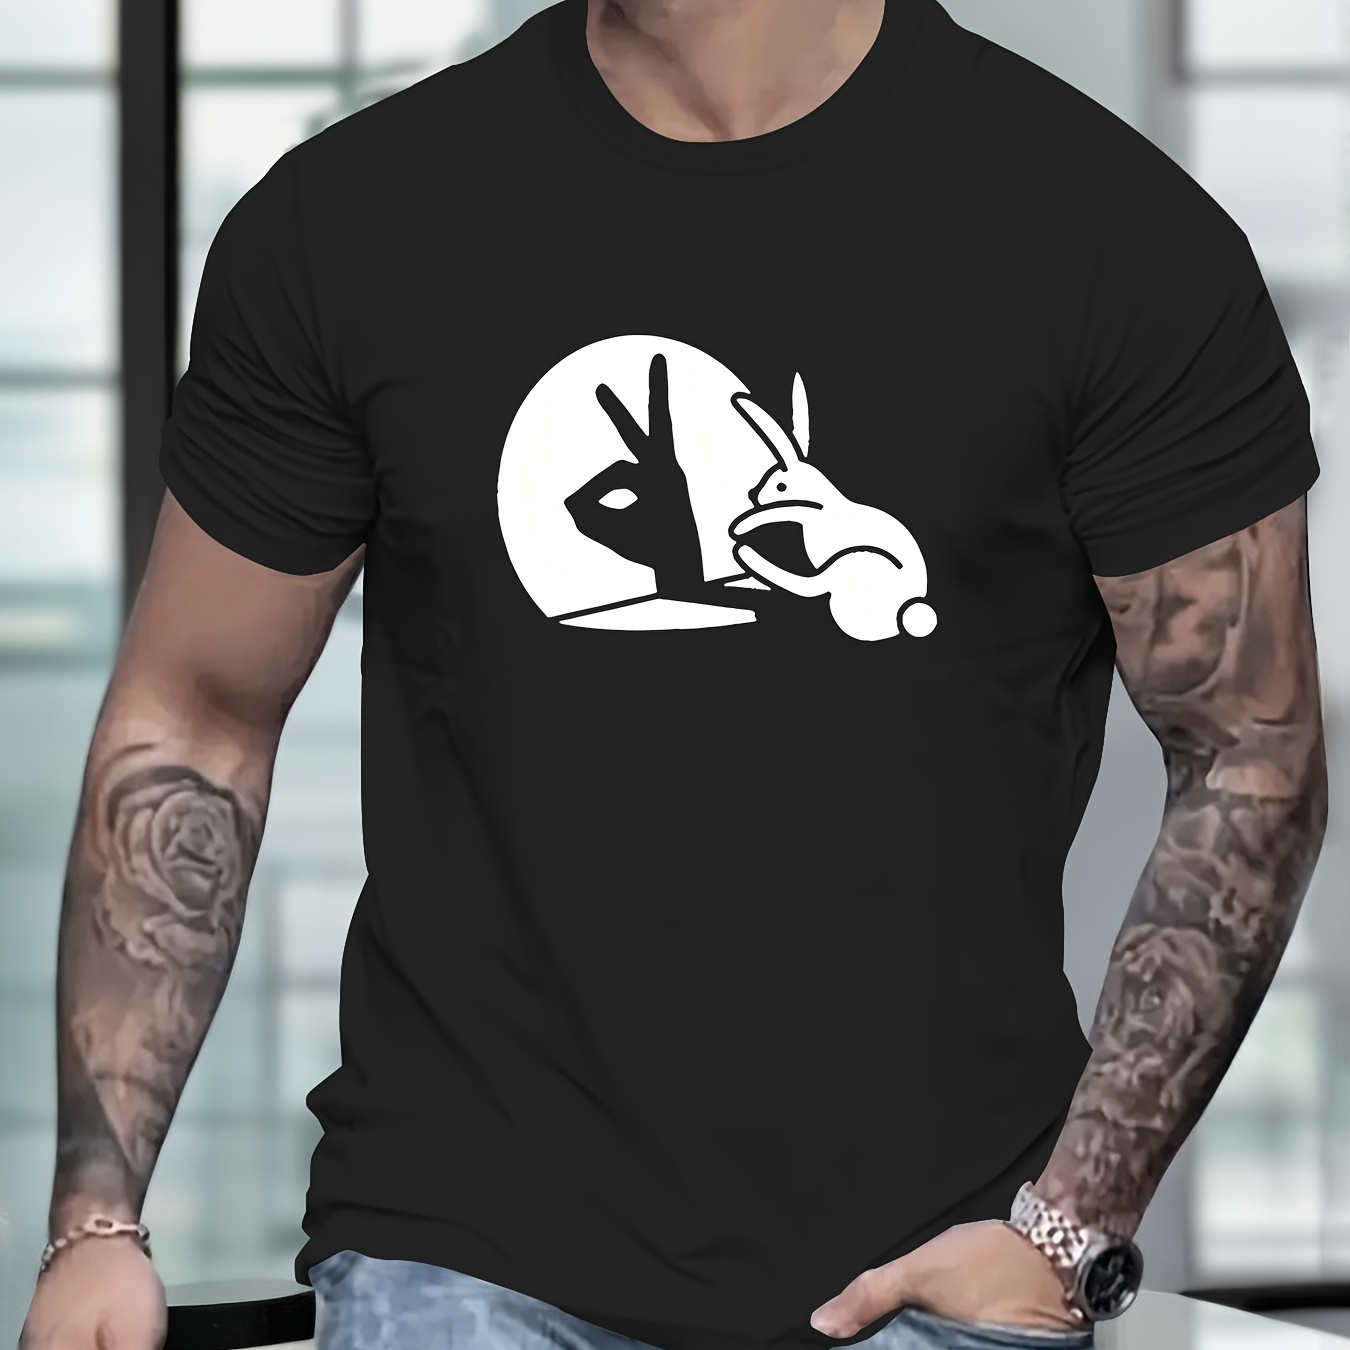 

Bunny Print T Shirt, Tees For Men, Casual Short Sleeve T-shirt For Summer